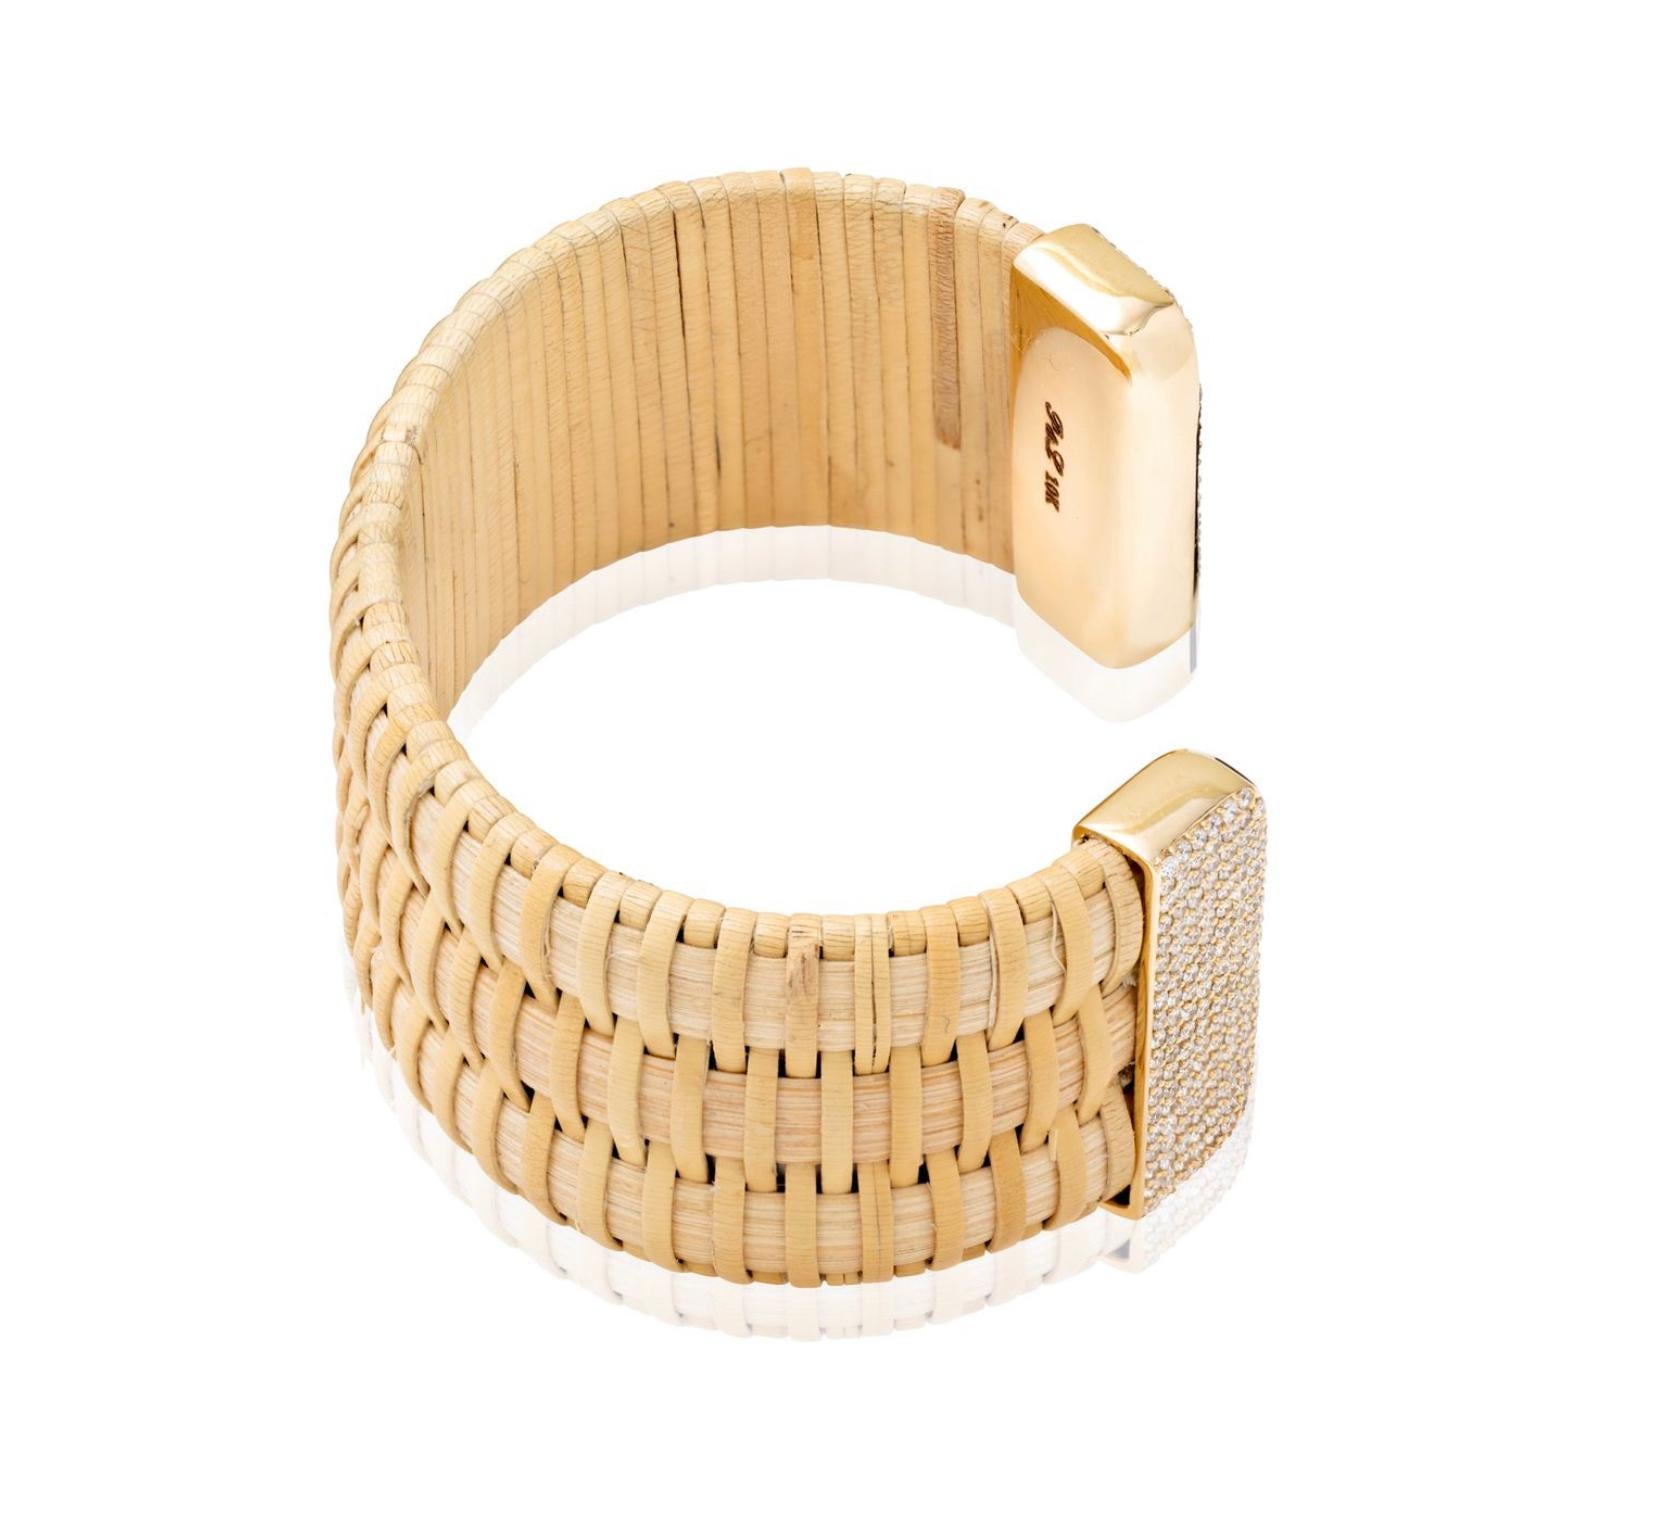 Nantucket Lightship Basket jewelry is a tradition in New England. This cuff follows the tradition of the weaving with a modern esthetic by adding gold and diamond caps. Natural cain & rattan cuff with 10K yellow gold caps and 1.2mm SI1 - SI2